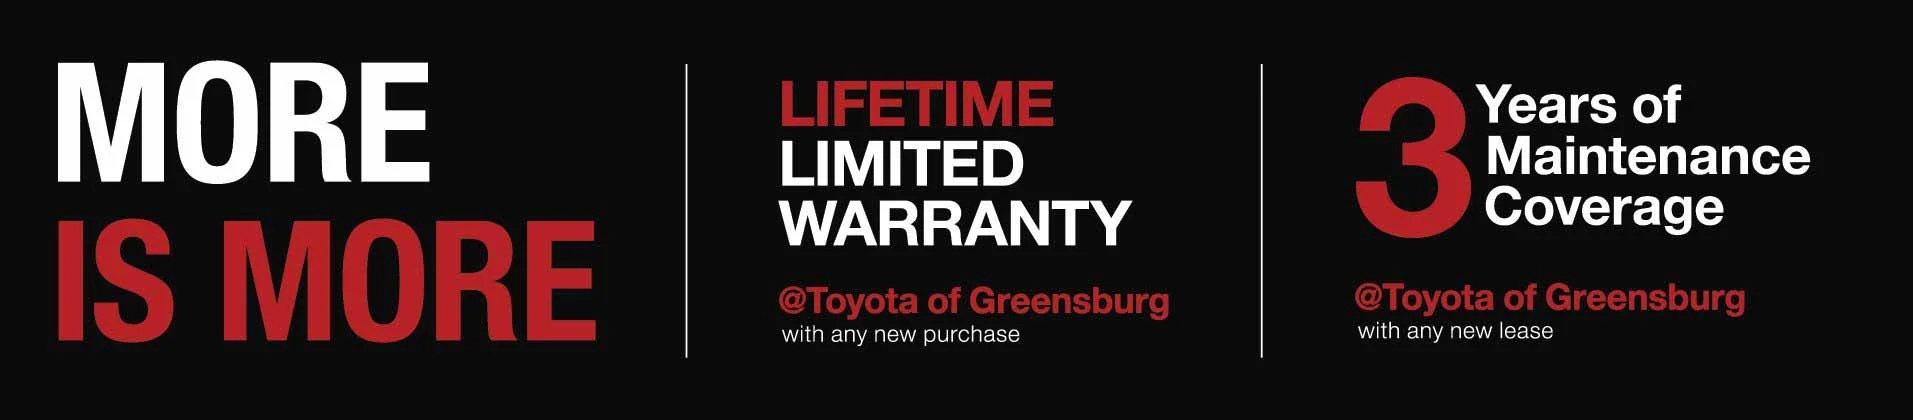 Lifetime Warranty at Toyota of Greensburg in Greensburg PA